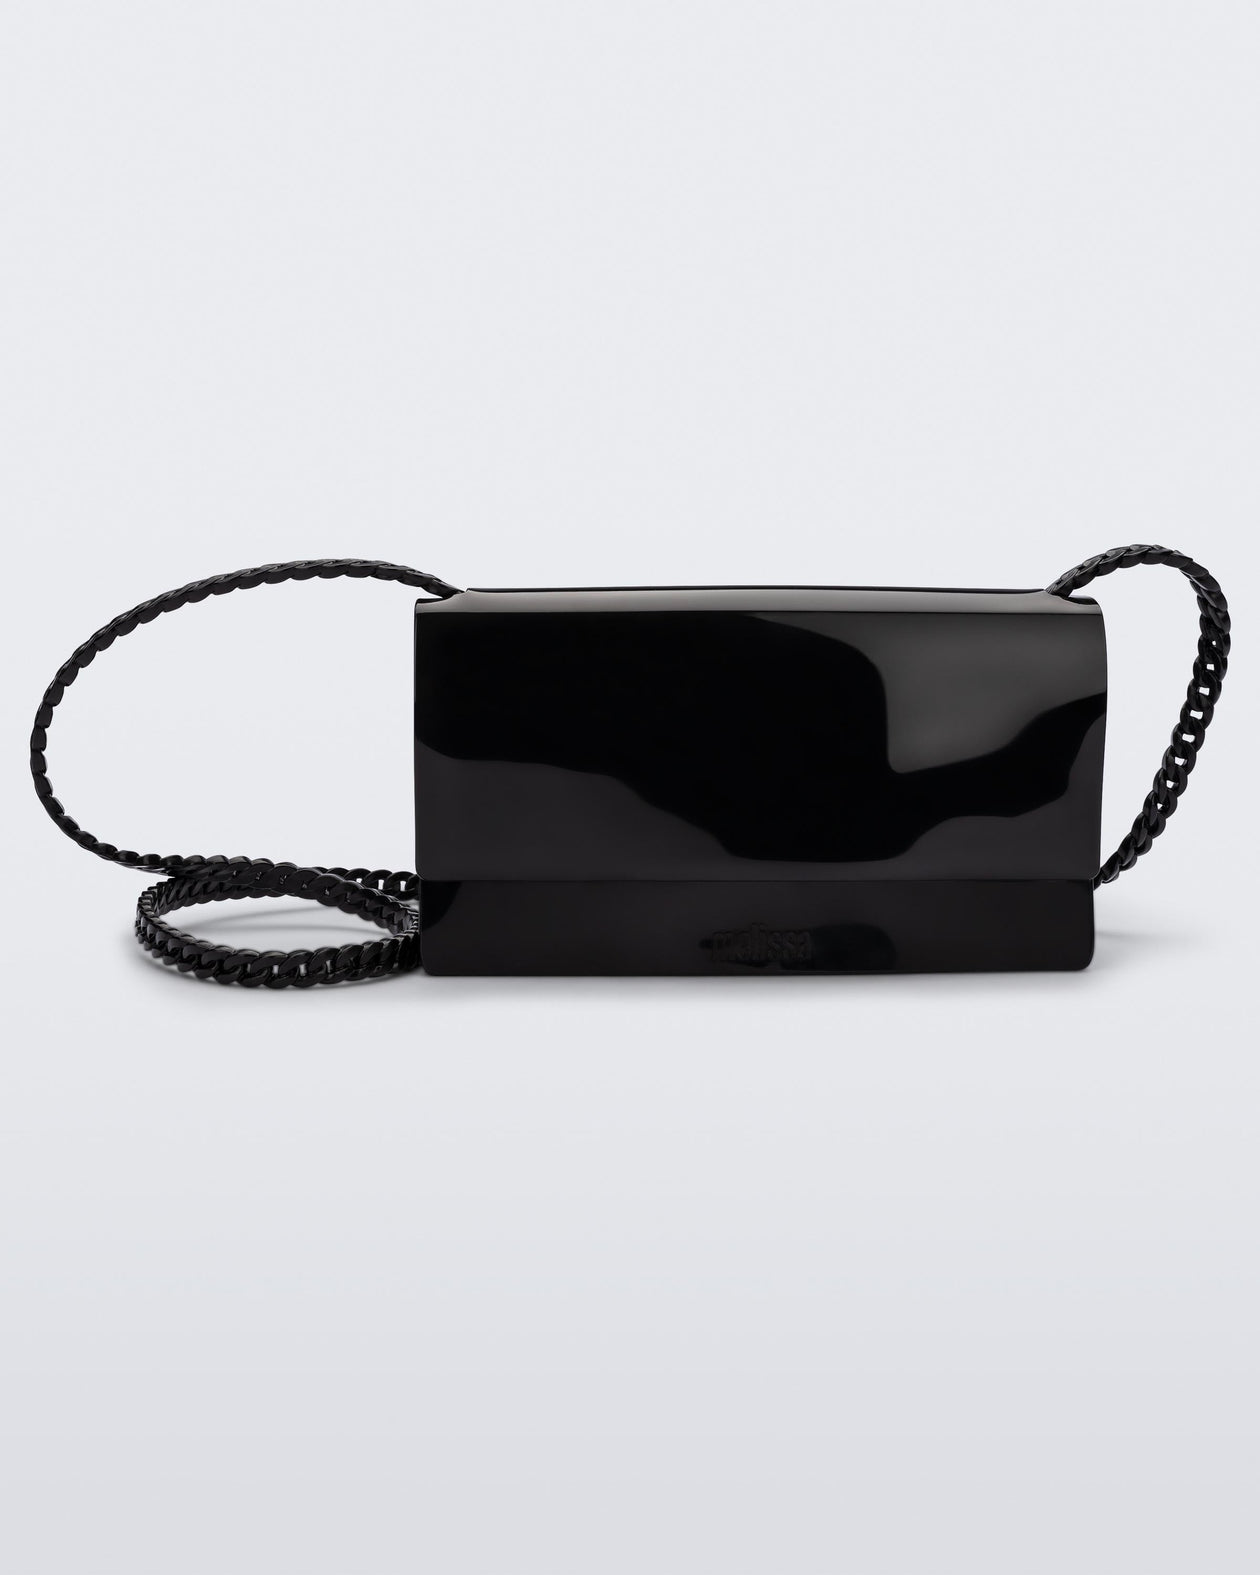 Front view of the Melissa party handbag in black with braided strap.